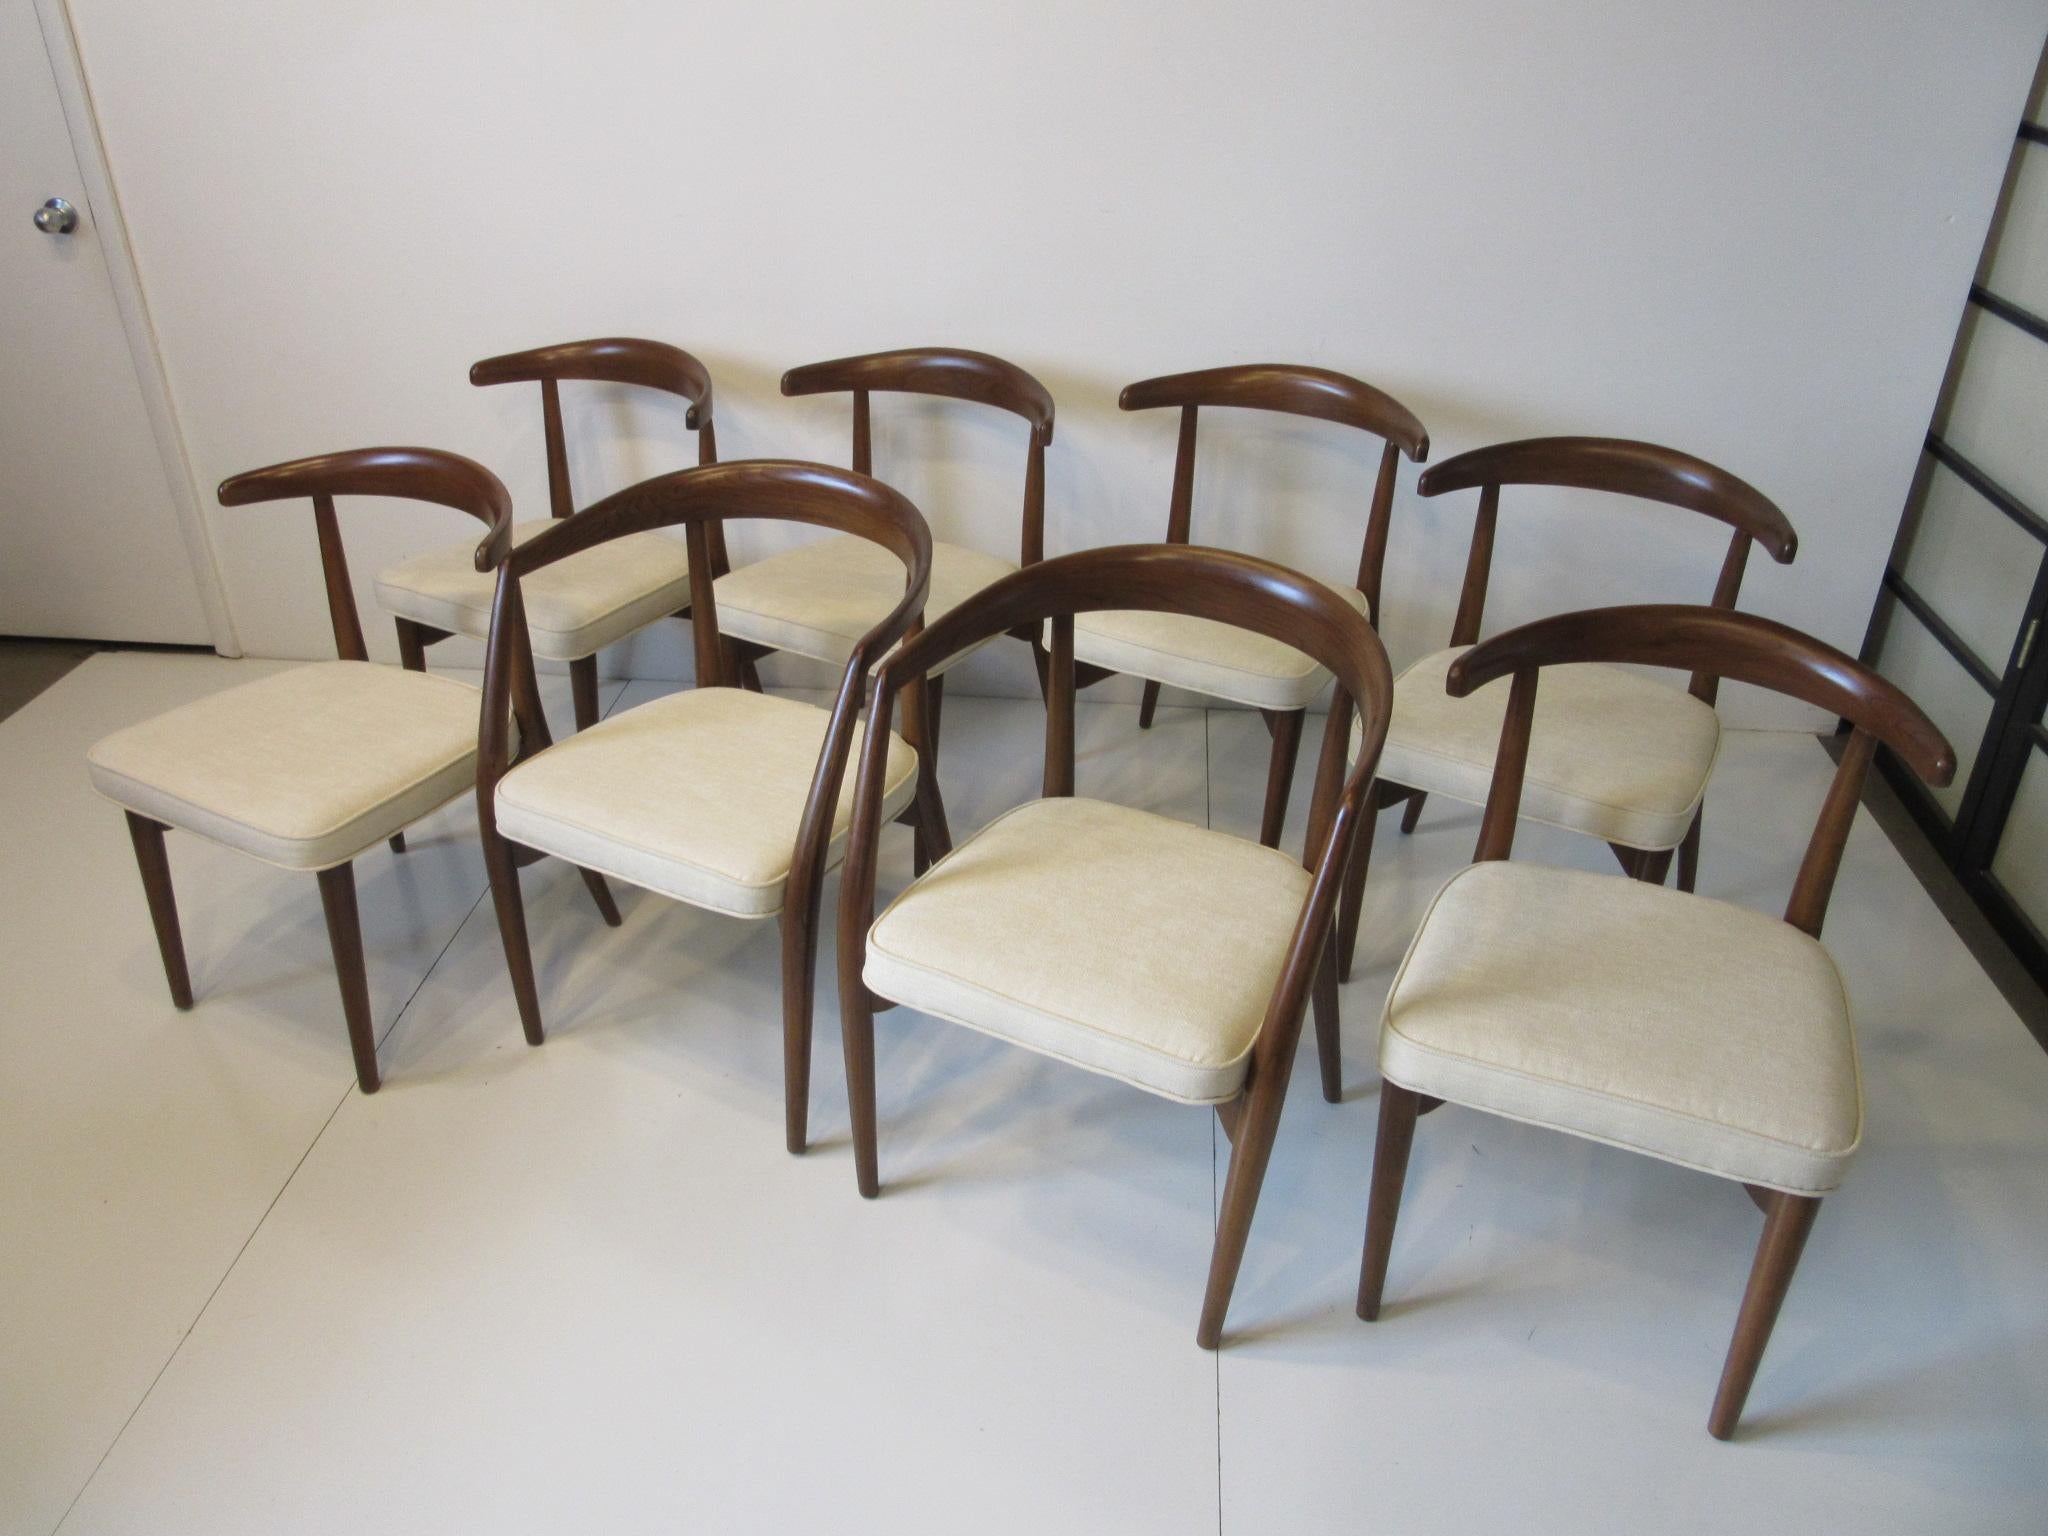 A set of eight sculptural dining chairs in a dark walnut finish with two Armchairs and six side chairs all with newly upholstered seats in a cream colored linen styled contract fabric . These handsome and well crafted chairs would work with any type